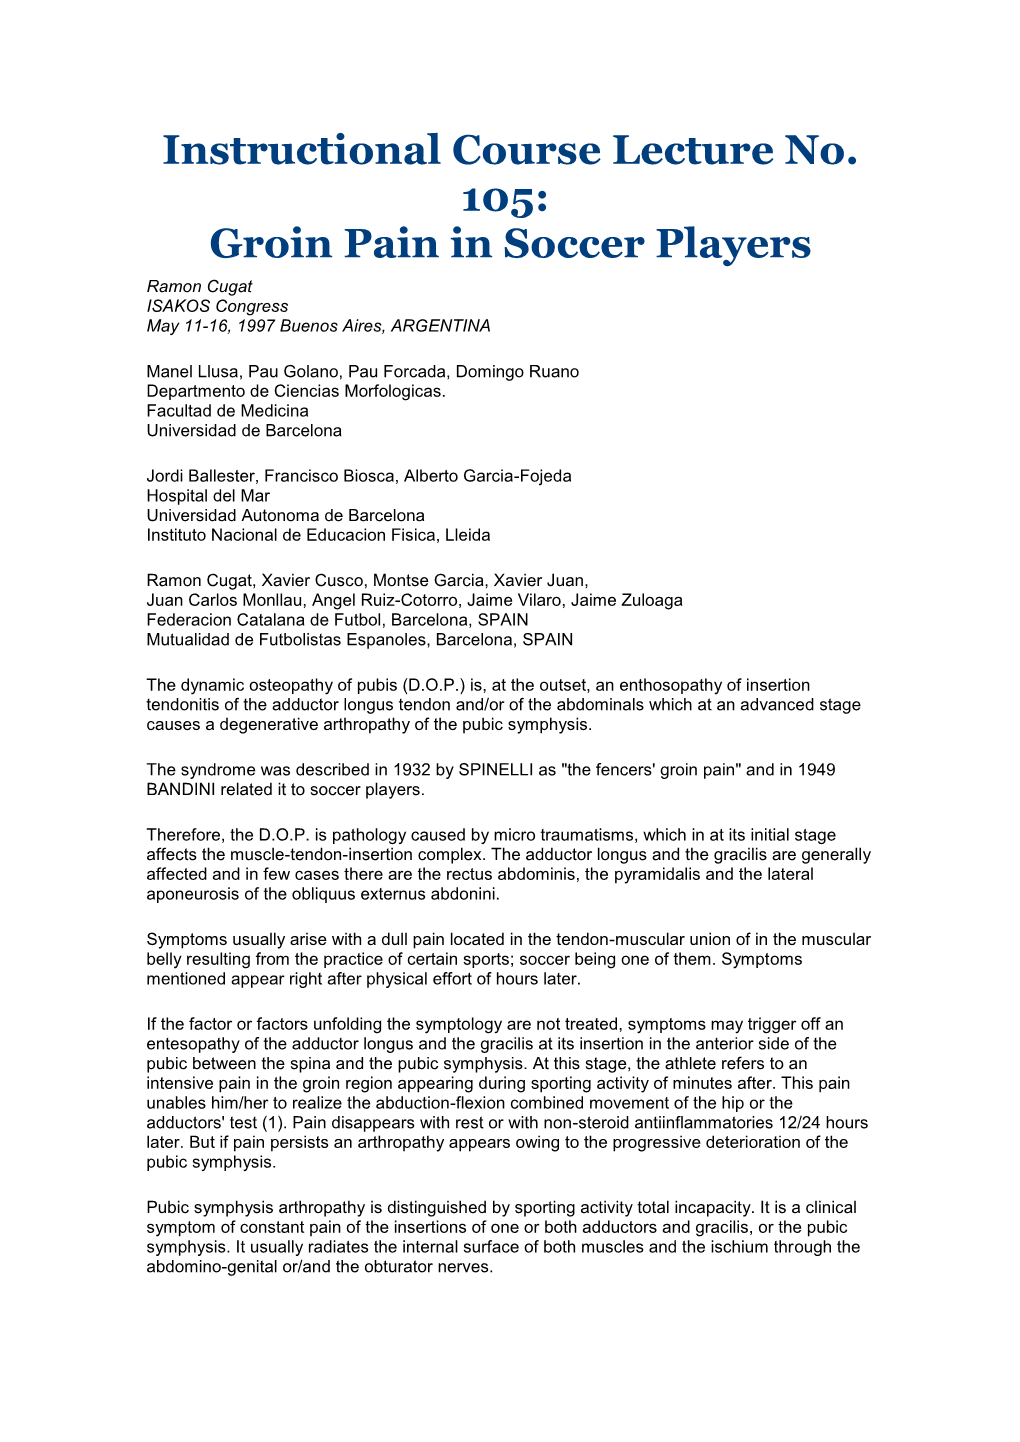 Groin Pain in Soccer Players Ramon Cugat ISAKOS Congress May 11-16, 1997 Buenos Aires, ARGENTINA